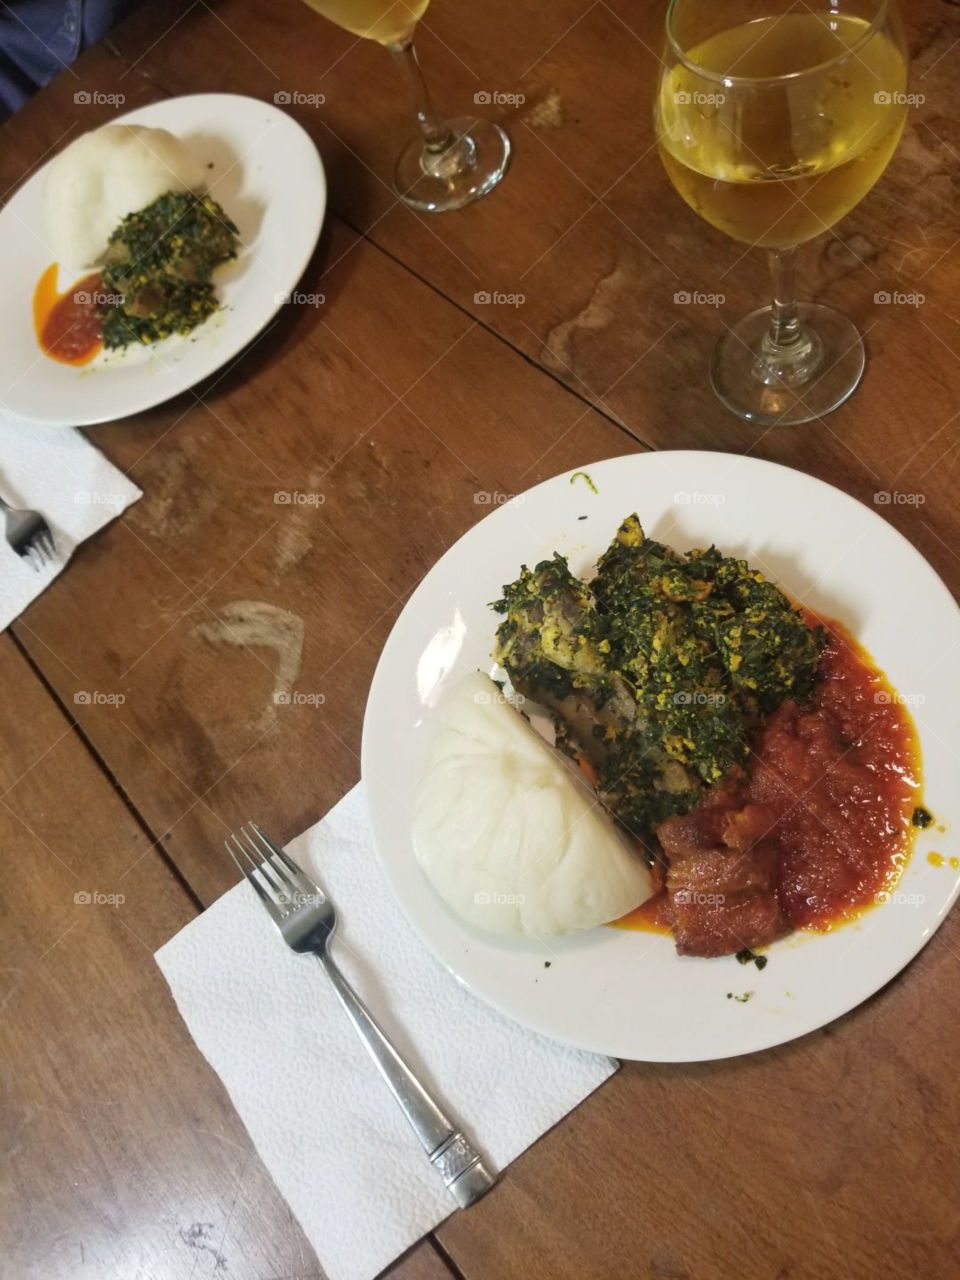 African nigerian food, egusi soup, pounded yam, and stew